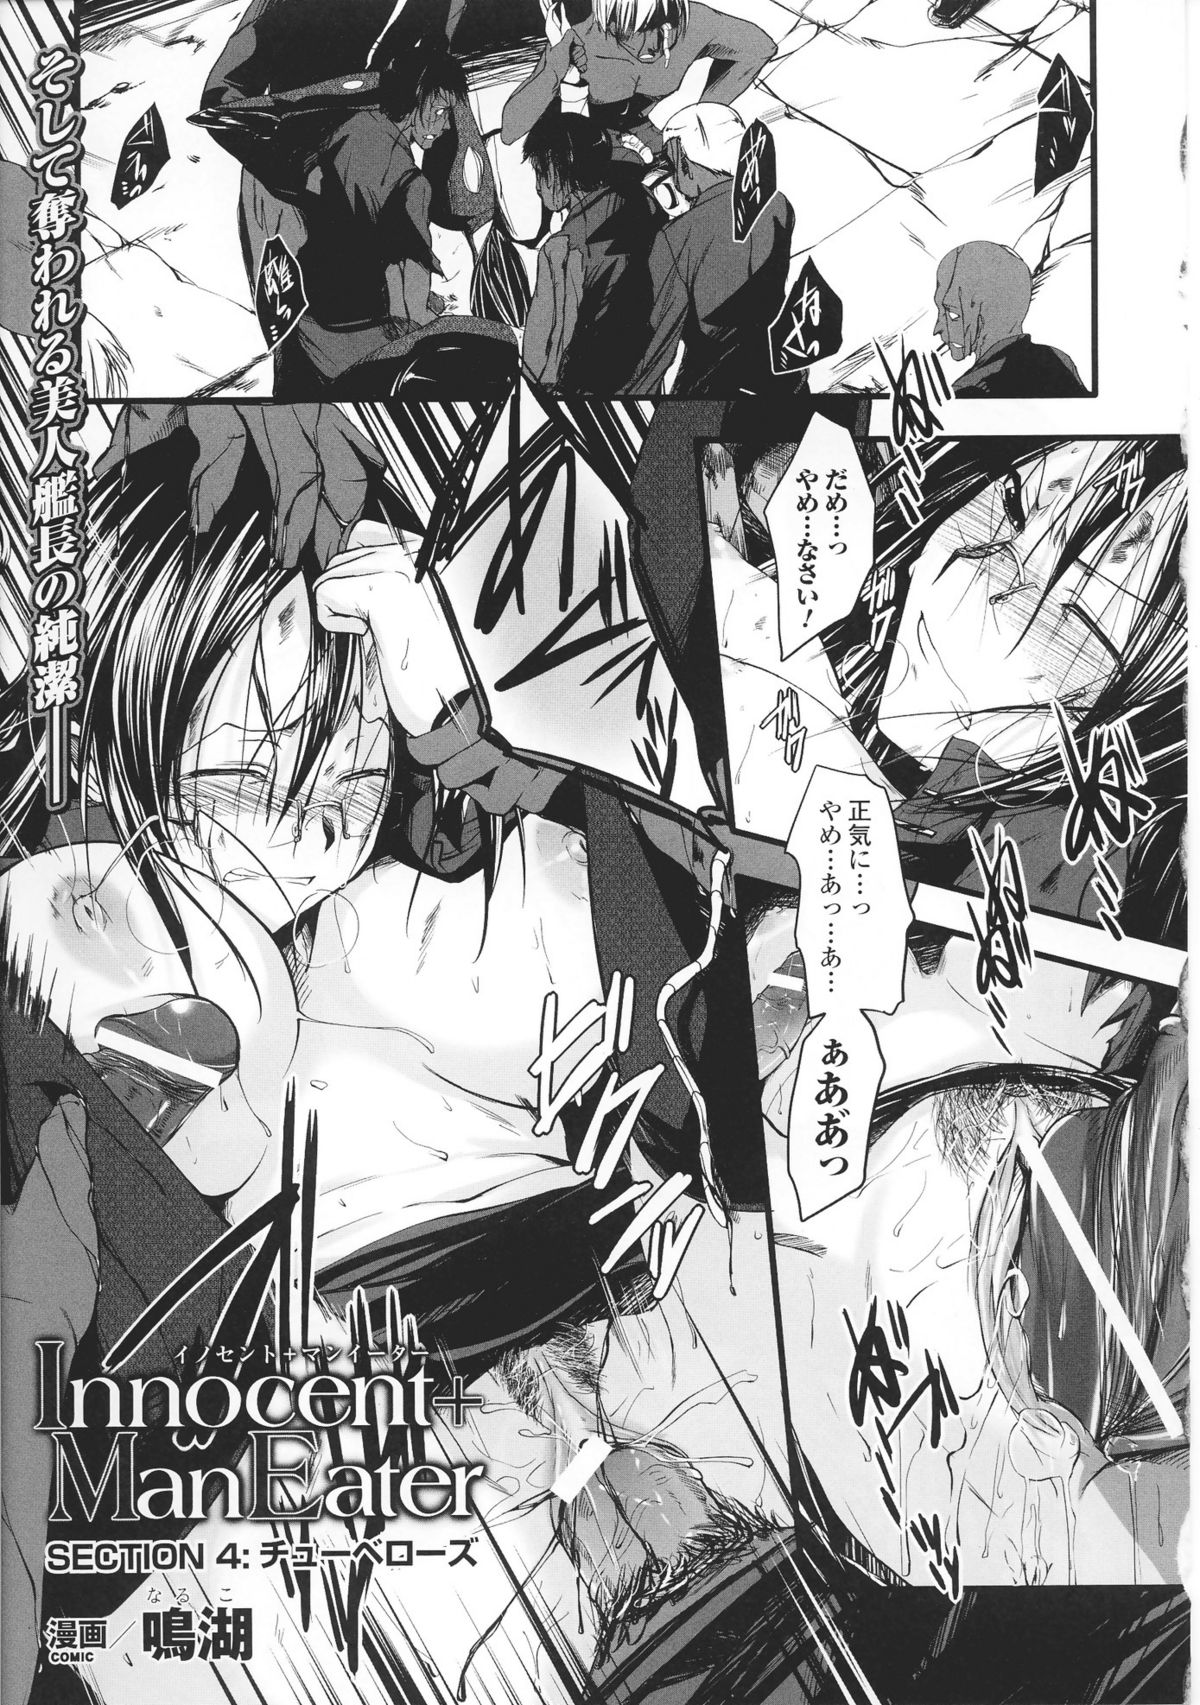 [Naruko] Innocent+ManEater Section 1-5 [Complete] [鳴湖] イノセント+マンイーター Section 1-5 [完全版]